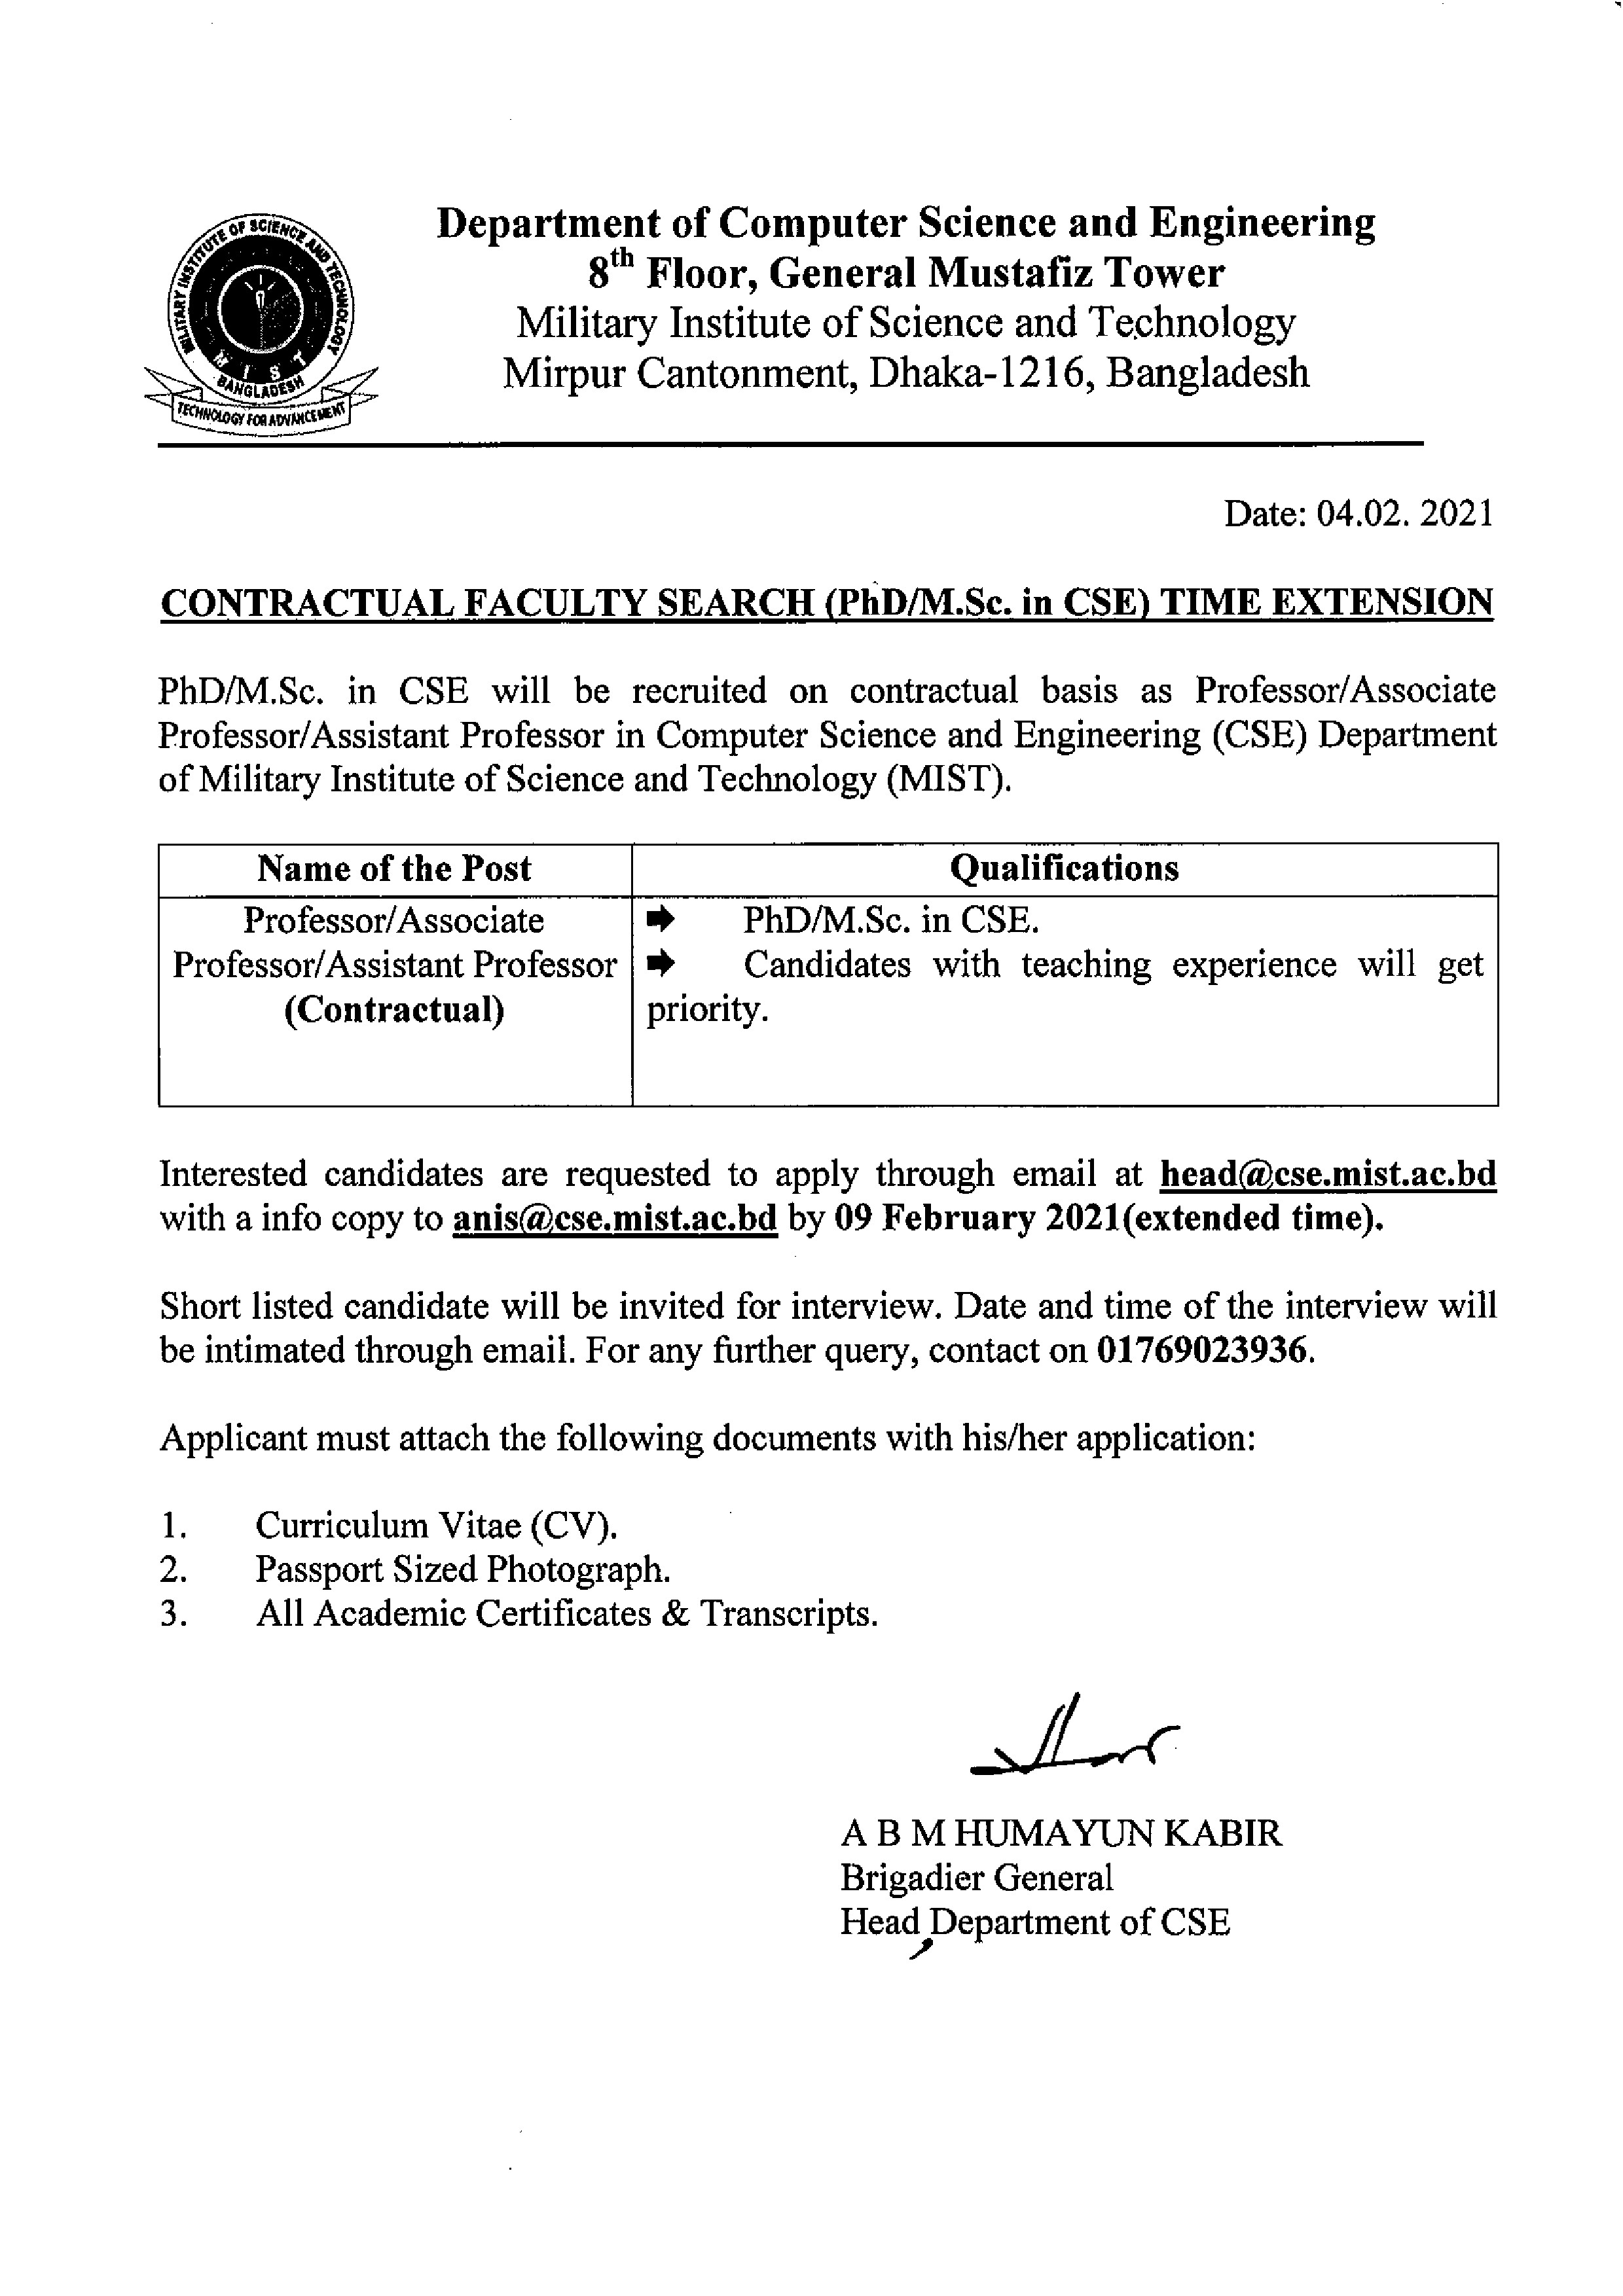 Contractual Faculty Search (PhD/M.Sc. in CSE) Time Extension